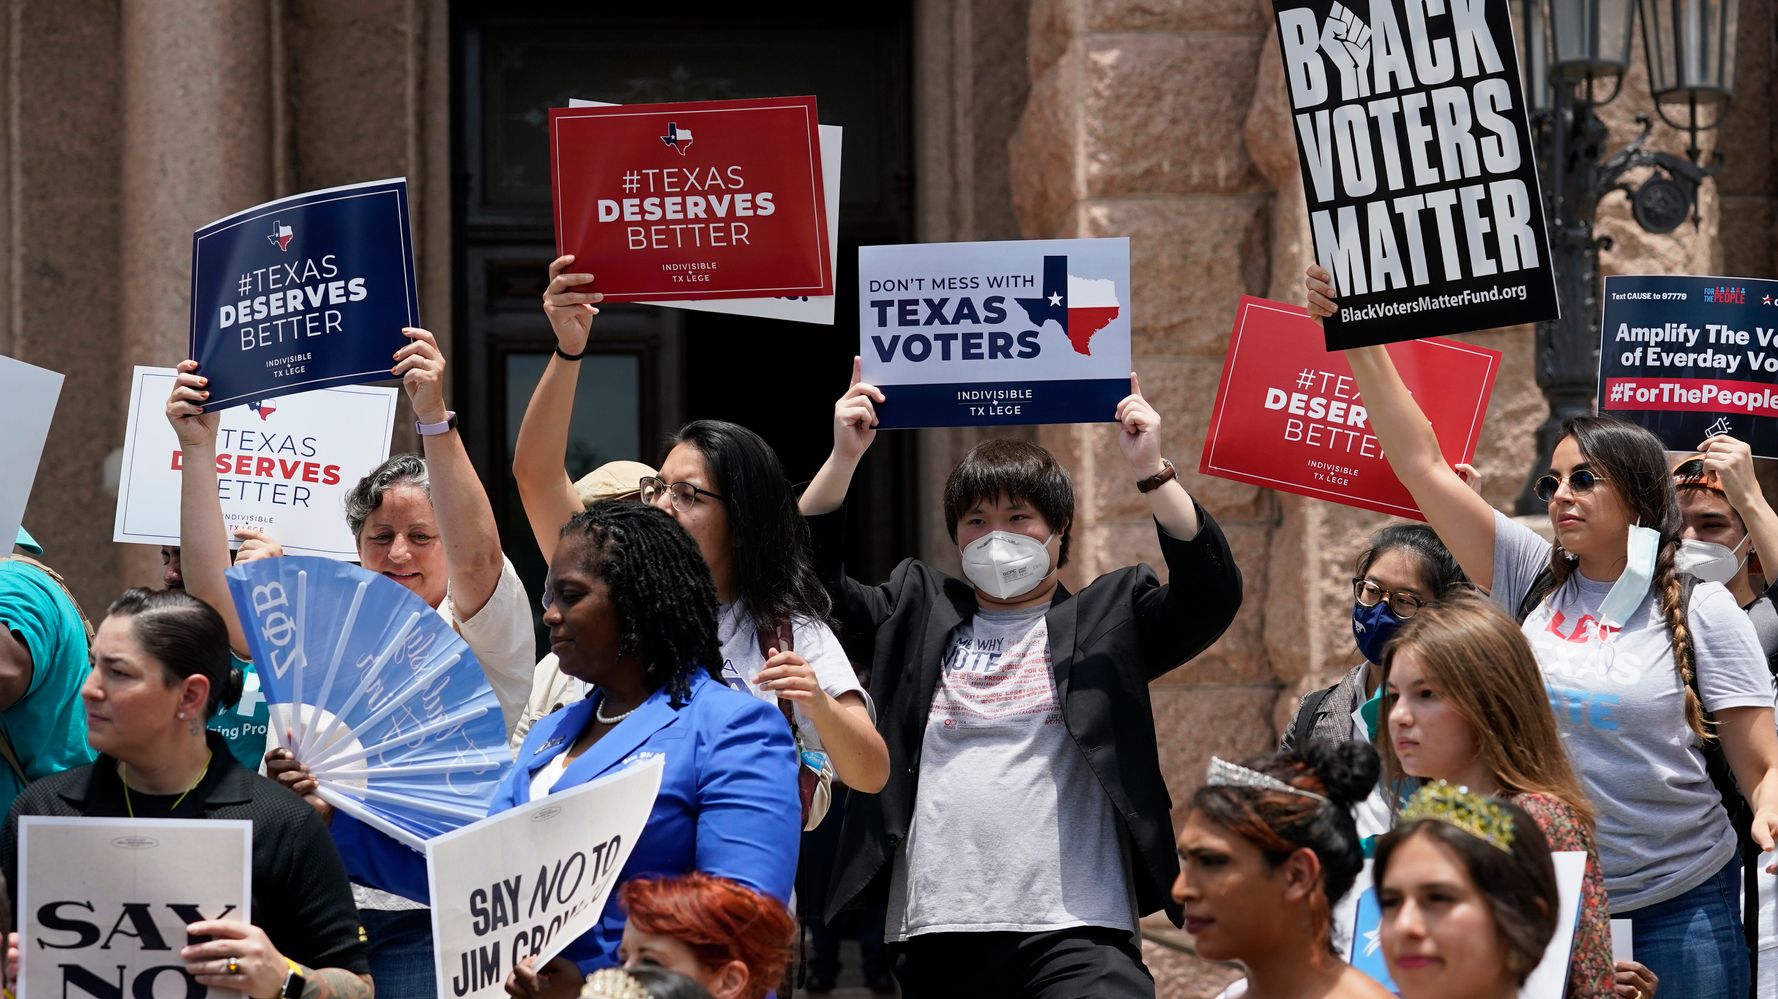 Civil Rights Groups Sue Texas Over Law Restricting Voting Rights